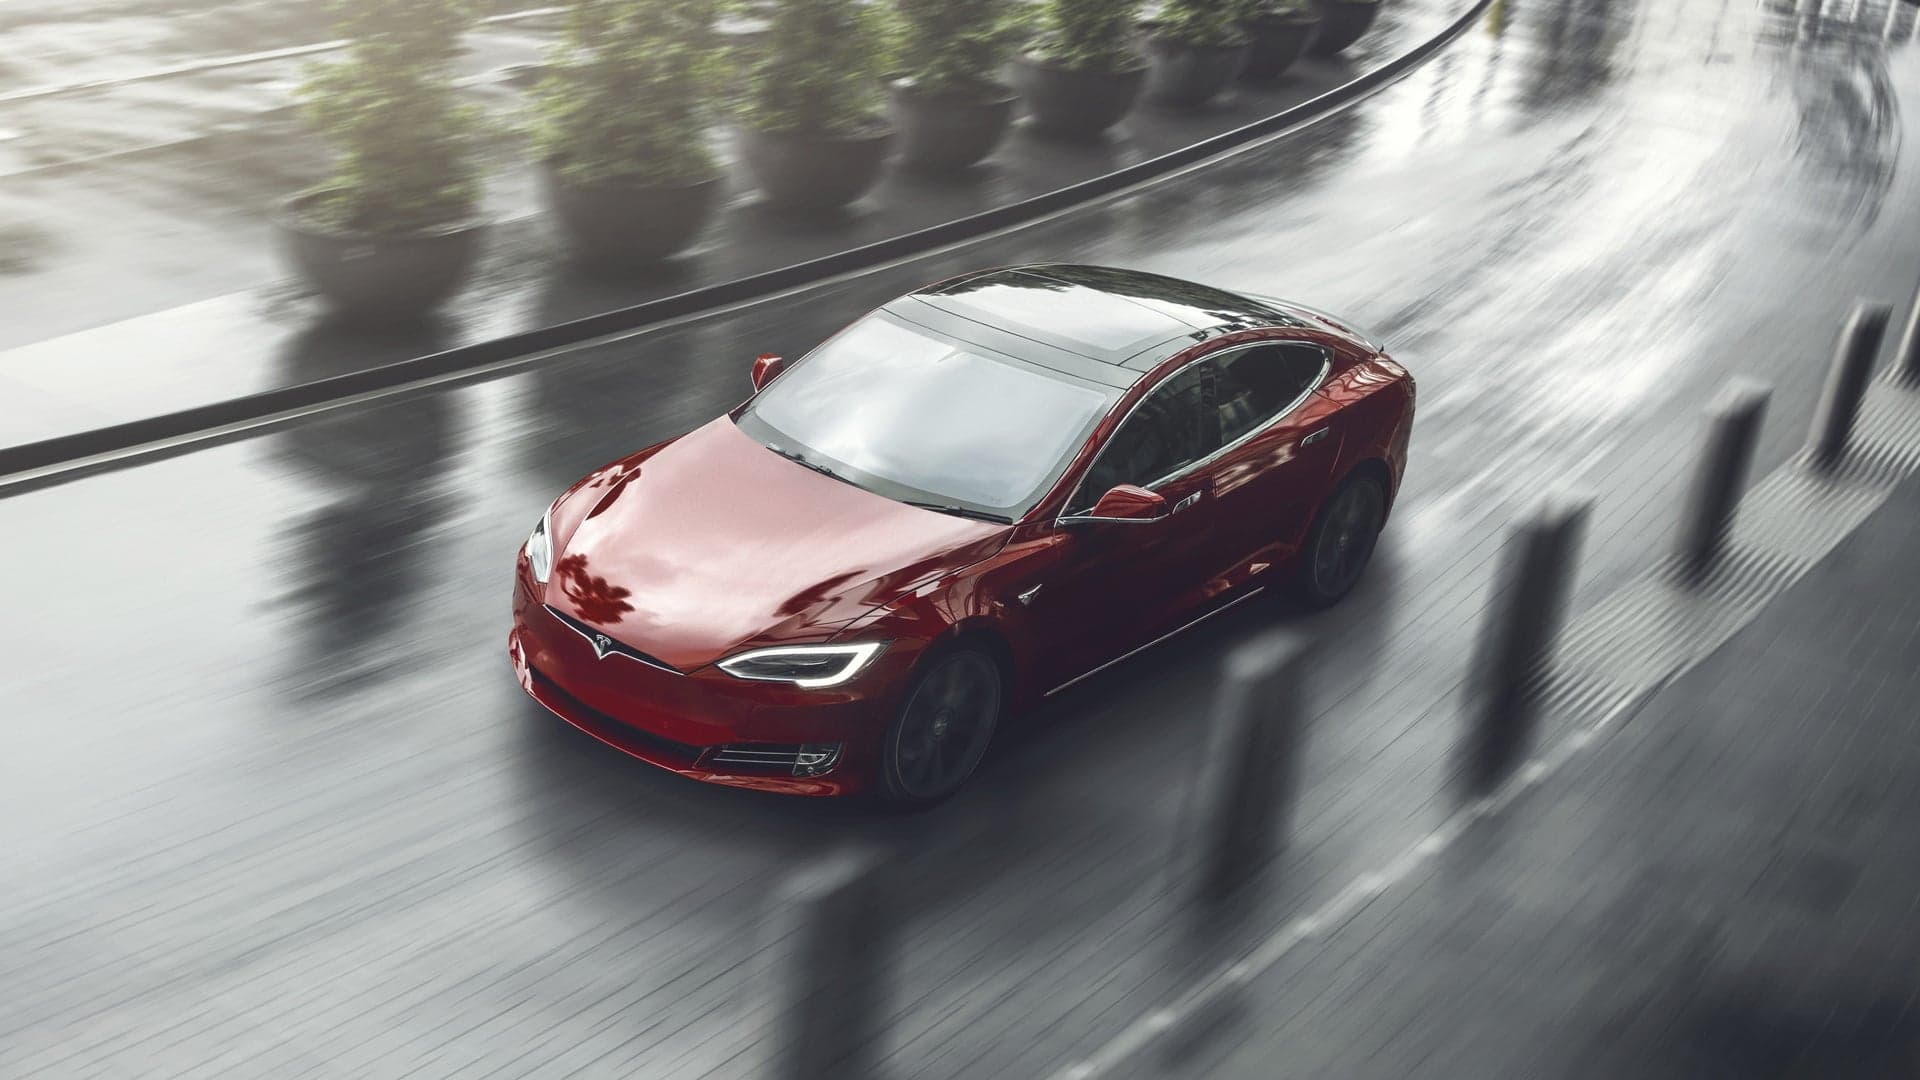 Tesla Model S Performance Now Runs 10 Second Quarter-Mile Times From the Factory